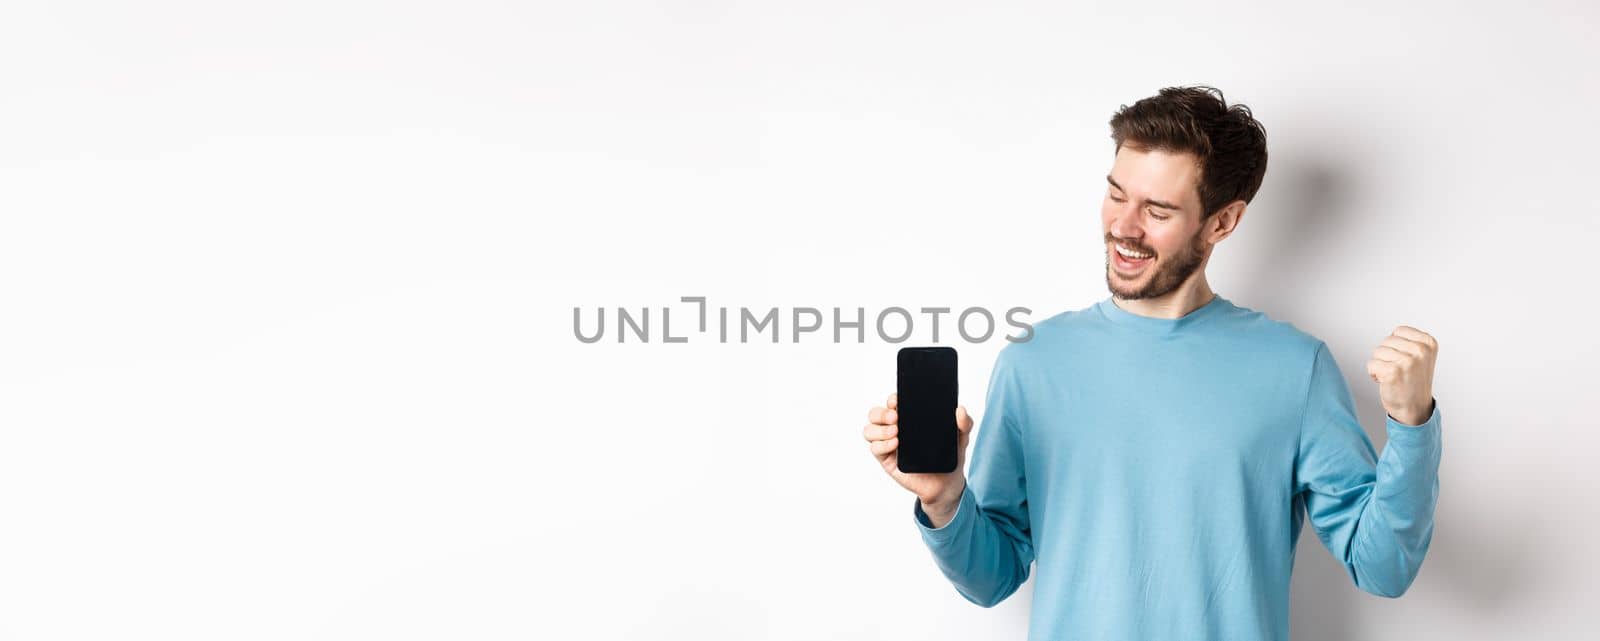 E-commerce and shopping concept. Lucky man winning online, showing empty smartphone screen and triumphing, saying yes with fist pump, standing over white background.